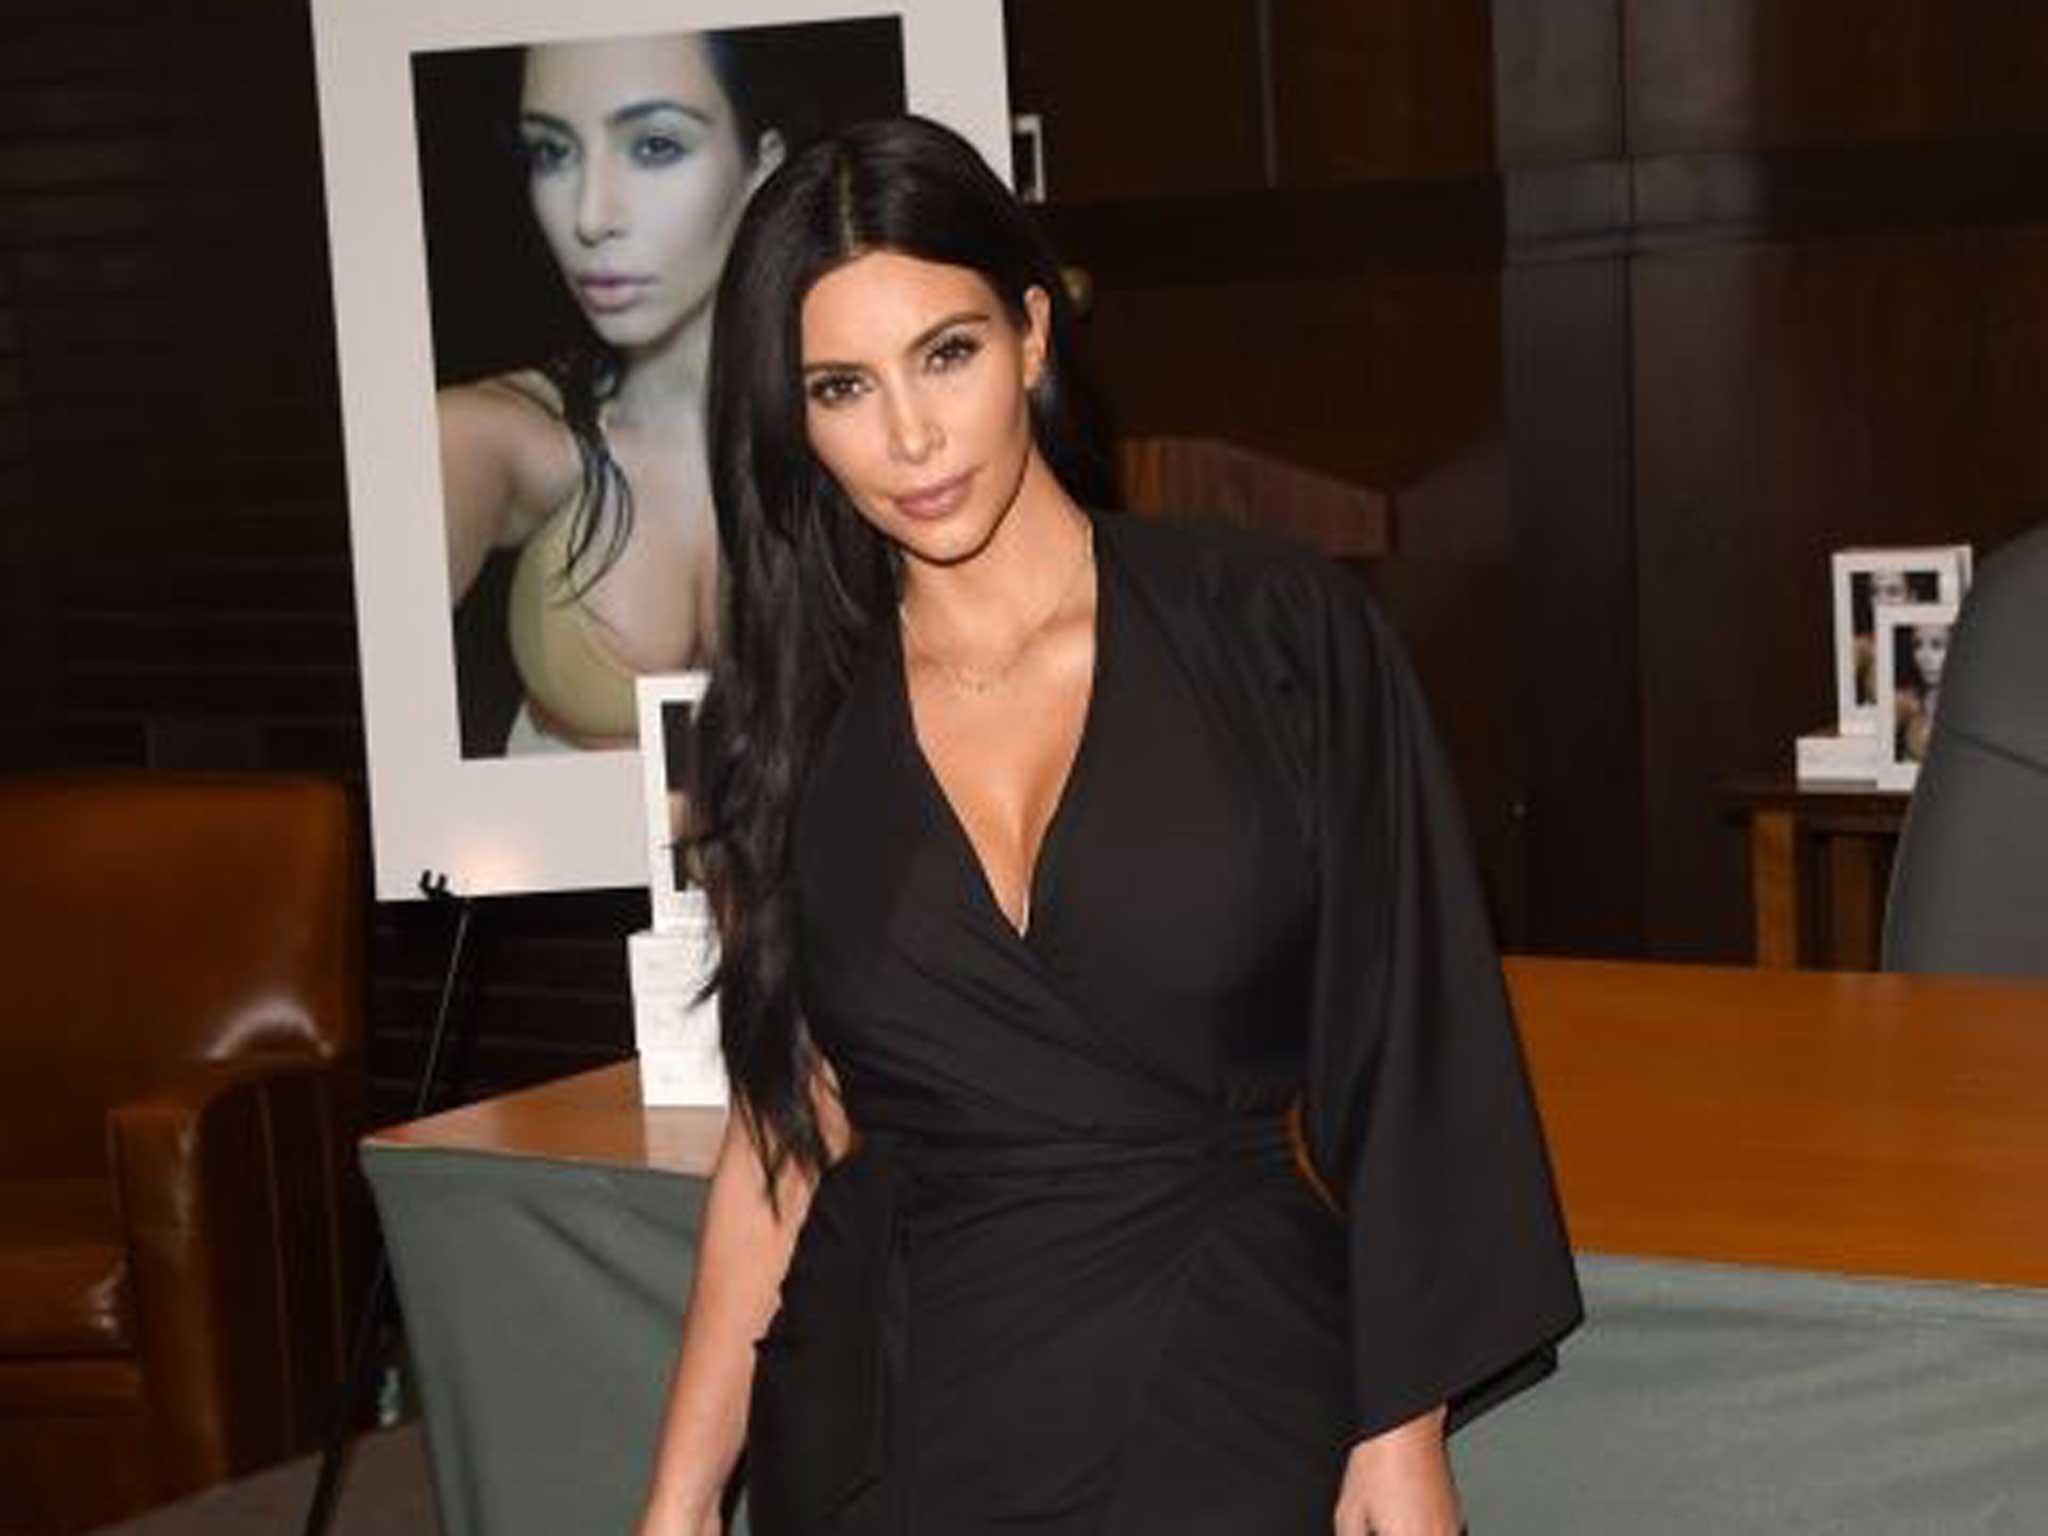 Kim Kardashian has recently 'written' a book about her life in selfies